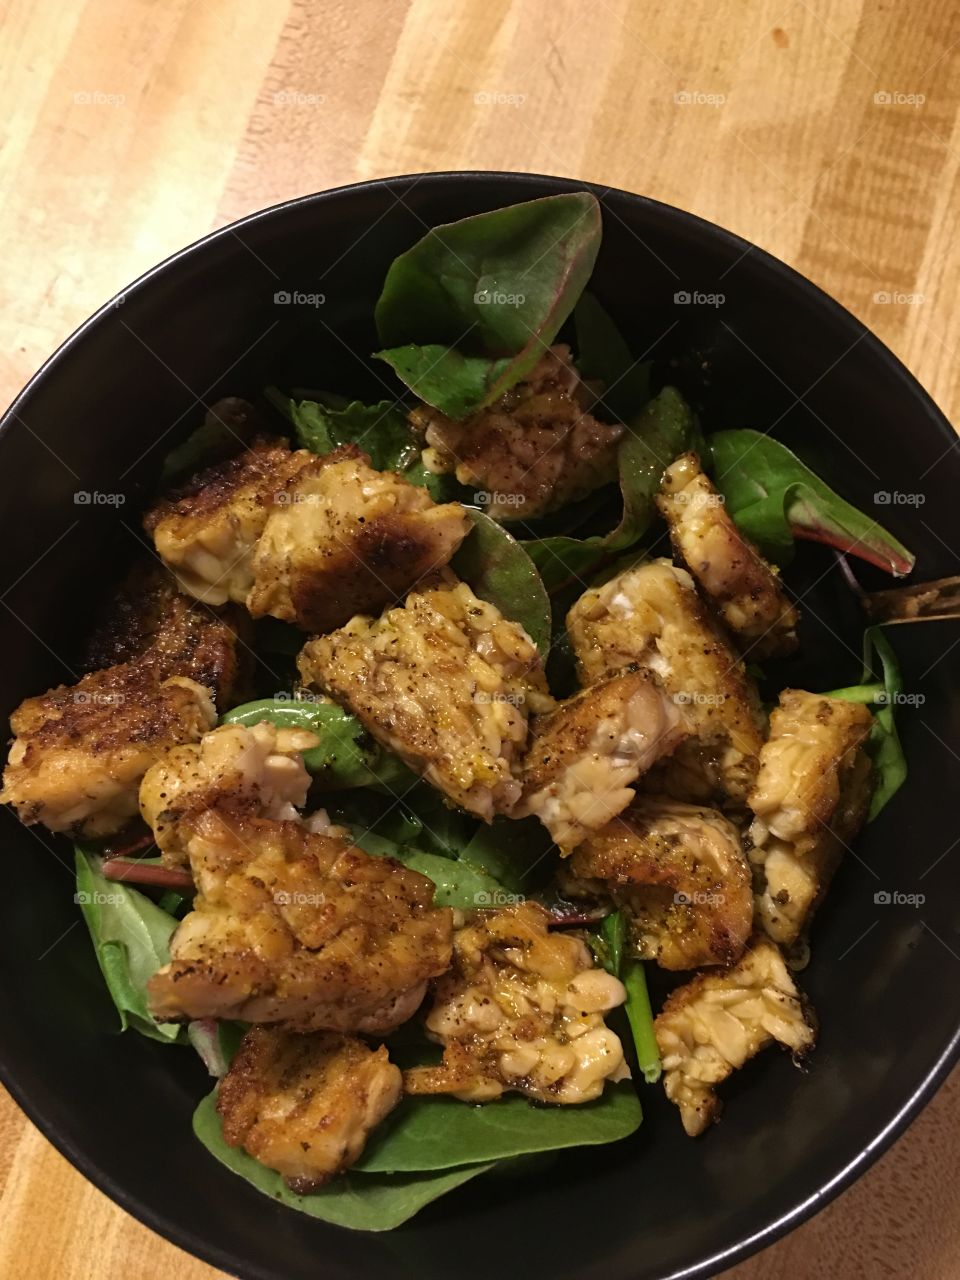 Tempeh and spinach salad with homemade lemon vinaigrette.